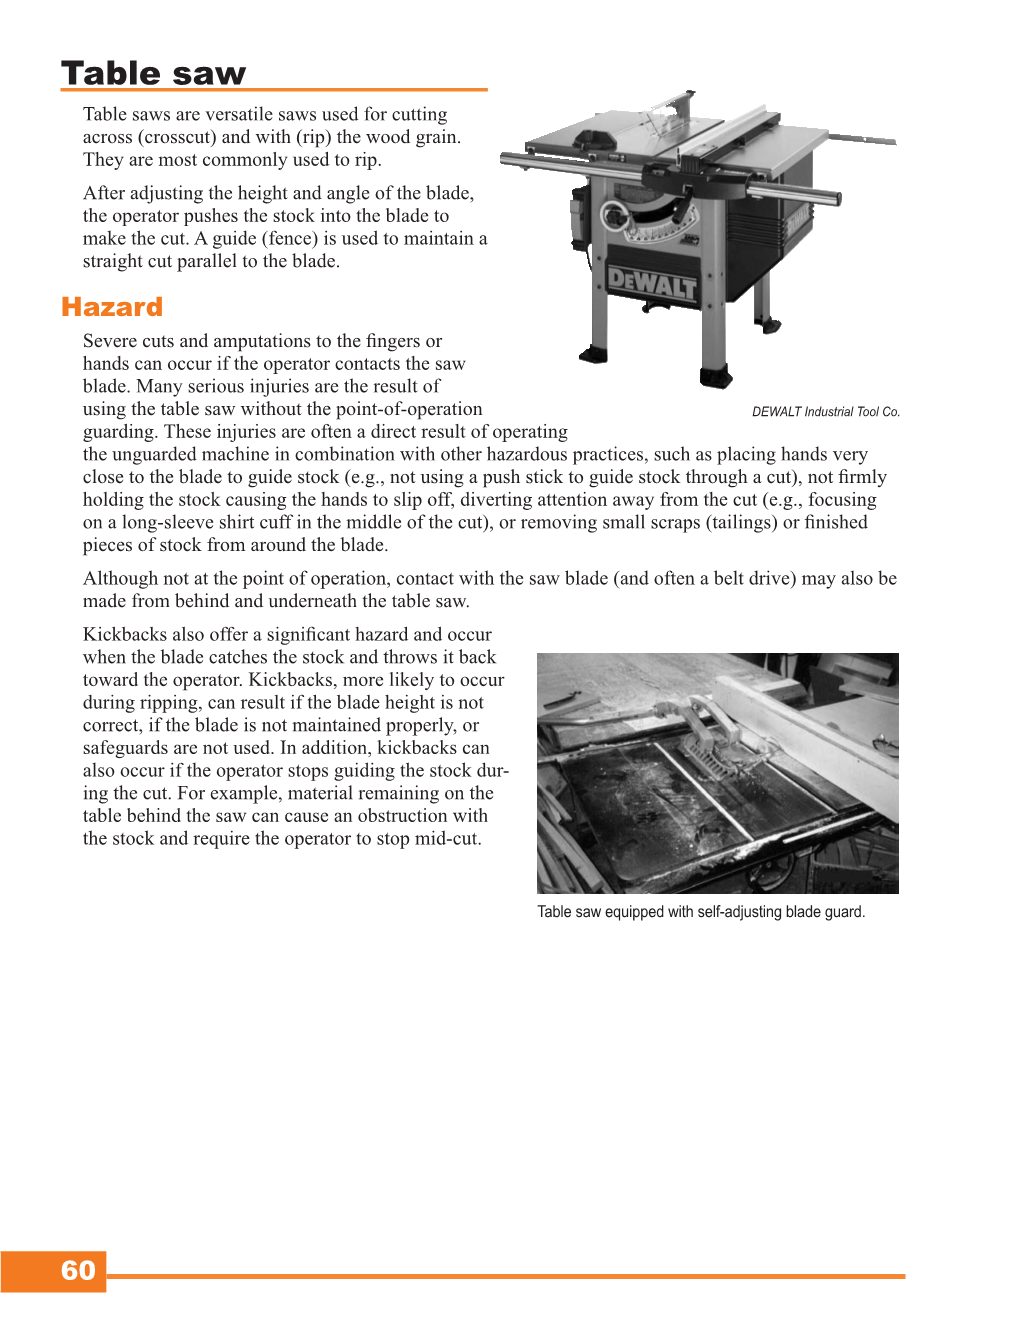 Table Saw Table Saws Are Versatile Saws Used for Cutting Across (Crosscut) and with (Rip) the Wood Grain